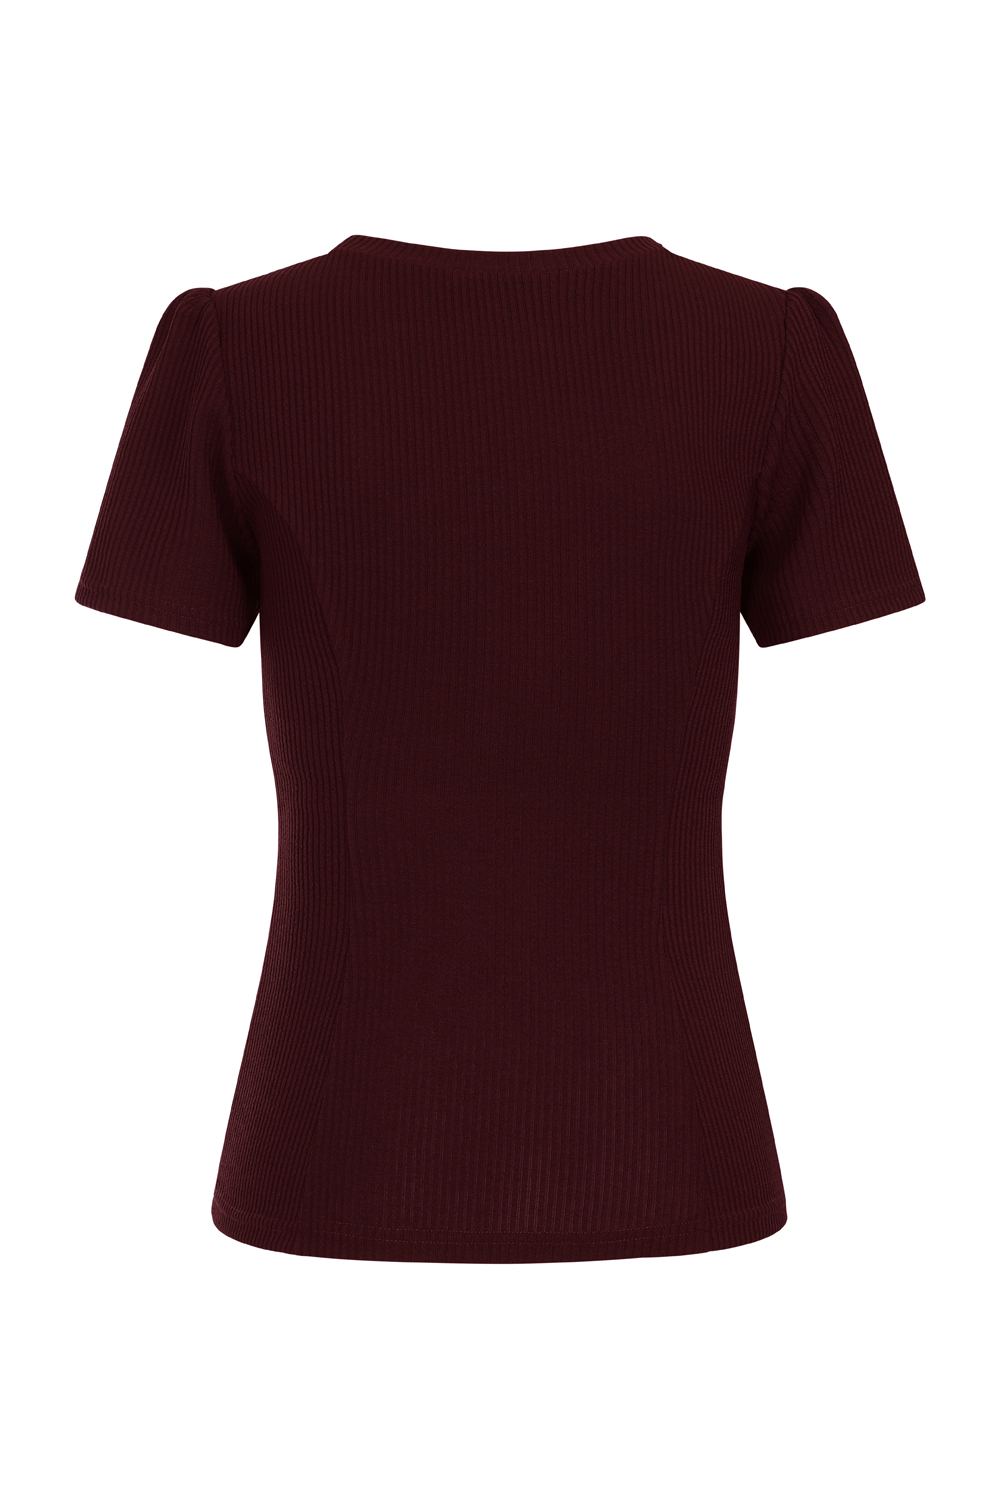 Susan Knitted Top in Burgundy